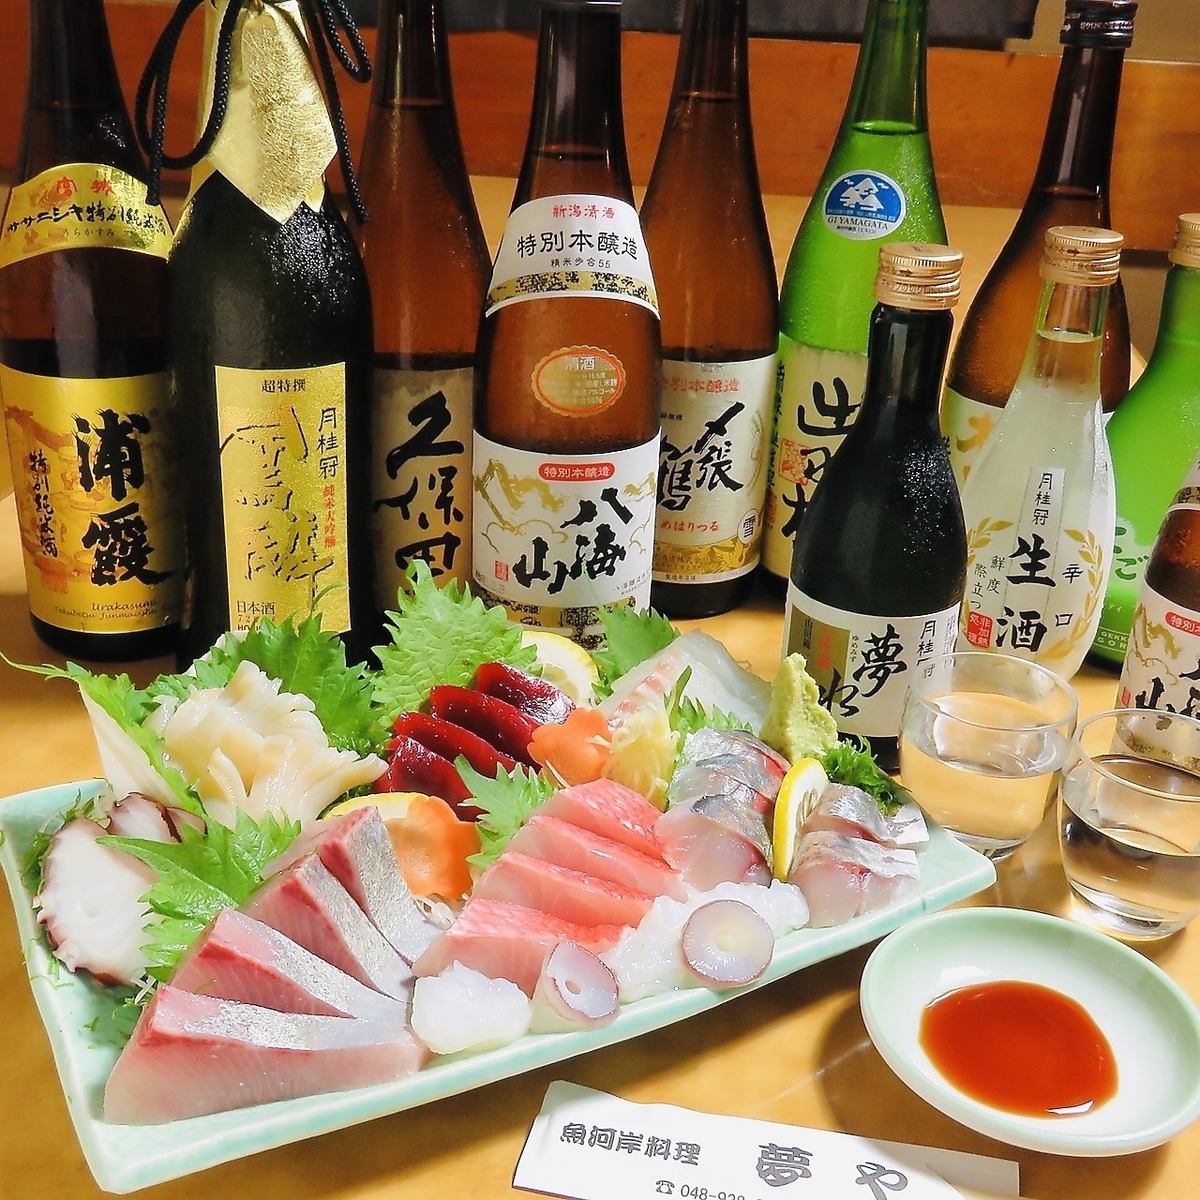 Carefully selected by the owner! Enjoy the fresh seasonal fish procured from Toyosu ☆